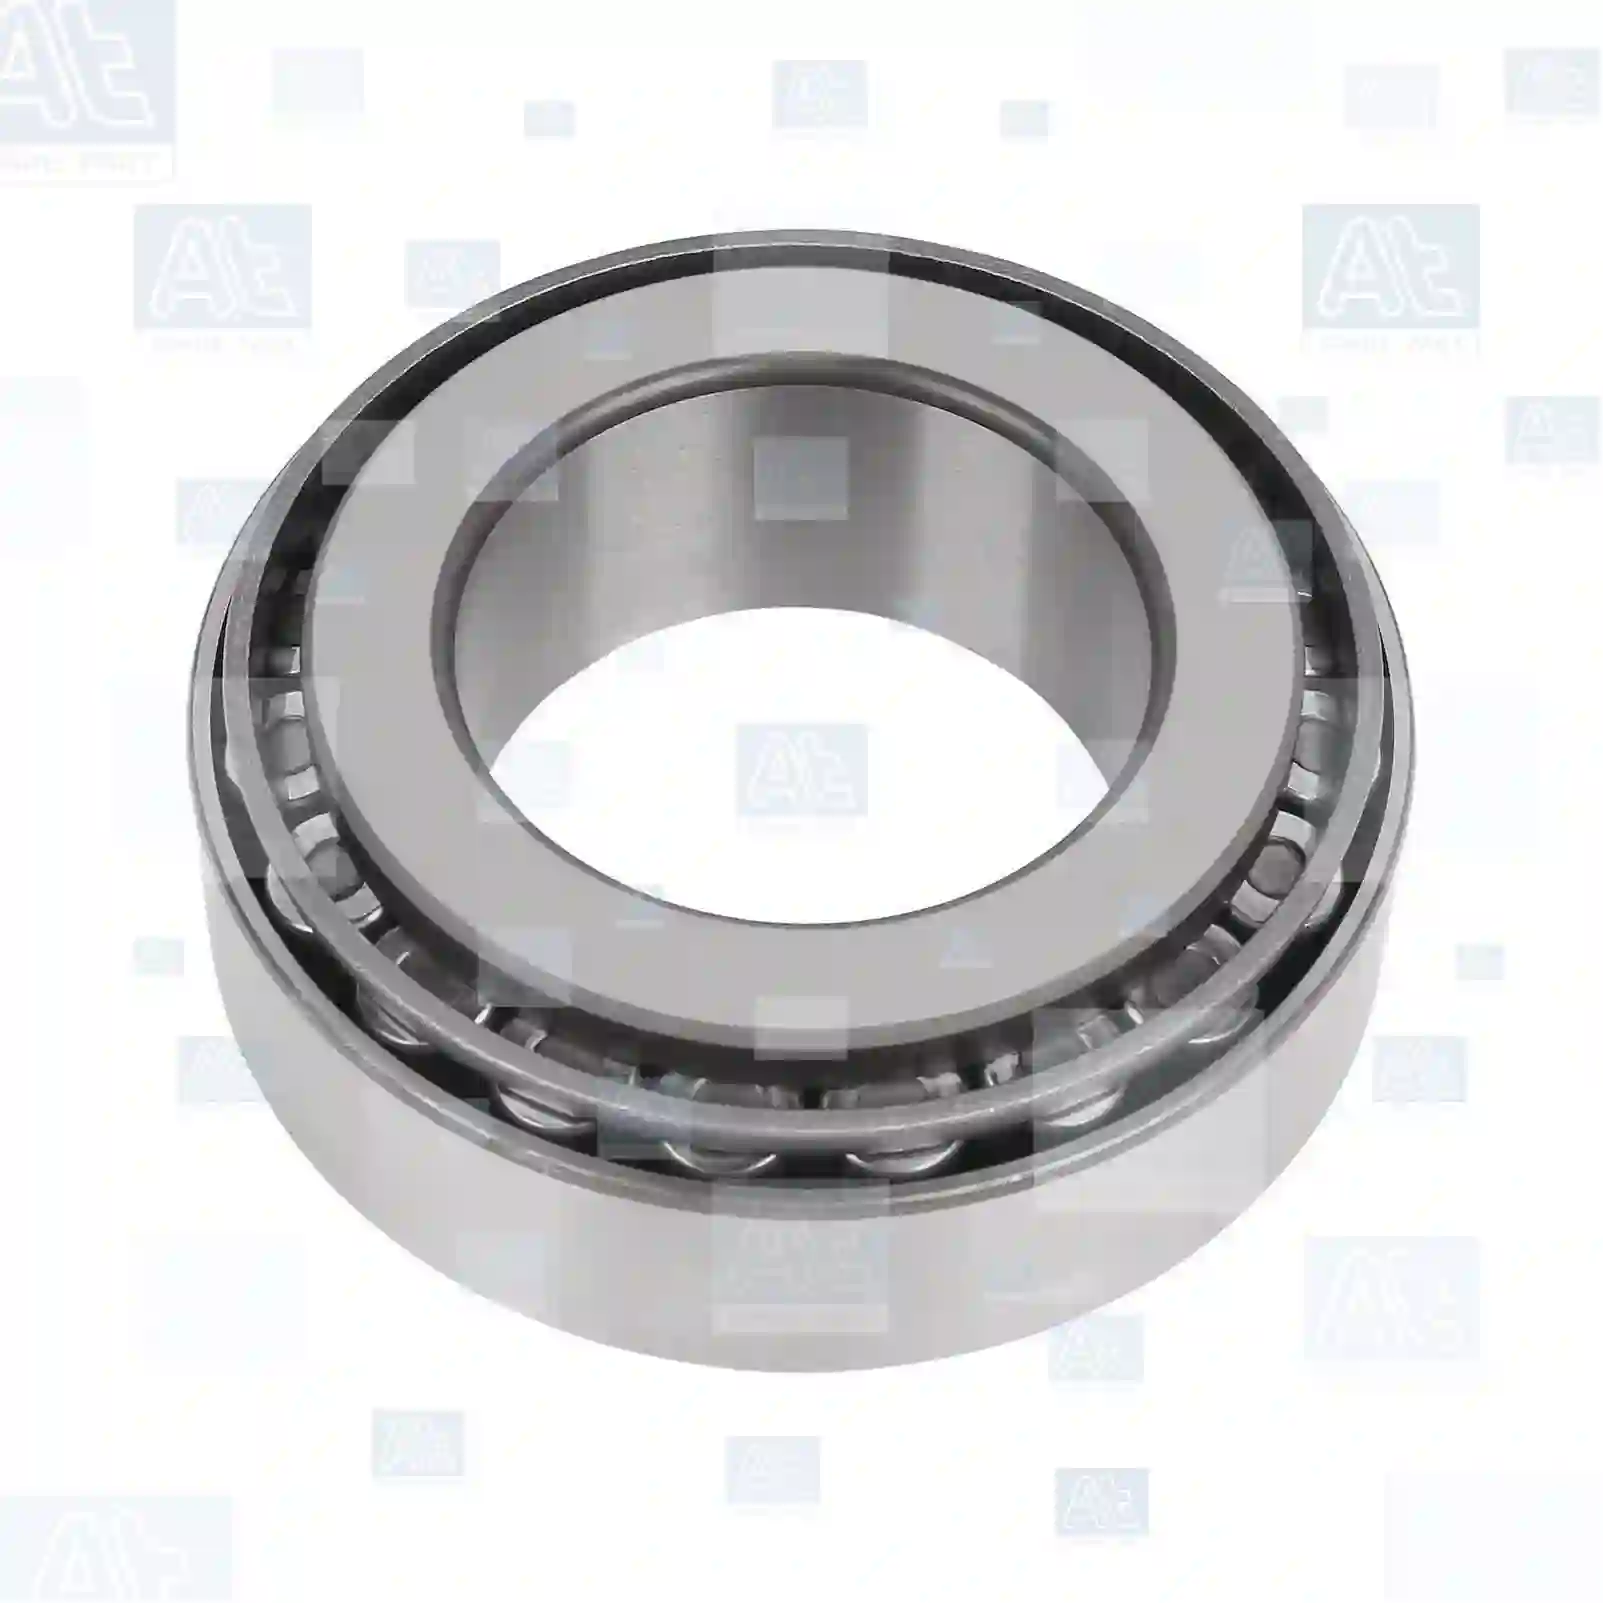 Tapered roller bearing, at no 77730935, oem no: 005090878, 4207540, TK4207540000, 01103142, 10500503, 710500503, 94050722, 988470101, 988470101A, 1-09812058-0, 1-09812062-0, 01103142, 01905296, 1905296, 26800200, 5010439064, 0009819305, 000720033214, 0019818005, 0039815205, 0039815605, 0039818505, 0049817305, 0069815205, 0069816405, 0023336061, 0023336111, 0959232214, 5000470673, 5000470862, 5000609898, 5010136663, 5010439064, 5010596402, 7401524058, 7401654326, 1524058, 1654326, 183279, 2808510 At Spare Part | Engine, Accelerator Pedal, Camshaft, Connecting Rod, Crankcase, Crankshaft, Cylinder Head, Engine Suspension Mountings, Exhaust Manifold, Exhaust Gas Recirculation, Filter Kits, Flywheel Housing, General Overhaul Kits, Engine, Intake Manifold, Oil Cleaner, Oil Cooler, Oil Filter, Oil Pump, Oil Sump, Piston & Liner, Sensor & Switch, Timing Case, Turbocharger, Cooling System, Belt Tensioner, Coolant Filter, Coolant Pipe, Corrosion Prevention Agent, Drive, Expansion Tank, Fan, Intercooler, Monitors & Gauges, Radiator, Thermostat, V-Belt / Timing belt, Water Pump, Fuel System, Electronical Injector Unit, Feed Pump, Fuel Filter, cpl., Fuel Gauge Sender,  Fuel Line, Fuel Pump, Fuel Tank, Injection Line Kit, Injection Pump, Exhaust System, Clutch & Pedal, Gearbox, Propeller Shaft, Axles, Brake System, Hubs & Wheels, Suspension, Leaf Spring, Universal Parts / Accessories, Steering, Electrical System, Cabin Tapered roller bearing, at no 77730935, oem no: 005090878, 4207540, TK4207540000, 01103142, 10500503, 710500503, 94050722, 988470101, 988470101A, 1-09812058-0, 1-09812062-0, 01103142, 01905296, 1905296, 26800200, 5010439064, 0009819305, 000720033214, 0019818005, 0039815205, 0039815605, 0039818505, 0049817305, 0069815205, 0069816405, 0023336061, 0023336111, 0959232214, 5000470673, 5000470862, 5000609898, 5010136663, 5010439064, 5010596402, 7401524058, 7401654326, 1524058, 1654326, 183279, 2808510 At Spare Part | Engine, Accelerator Pedal, Camshaft, Connecting Rod, Crankcase, Crankshaft, Cylinder Head, Engine Suspension Mountings, Exhaust Manifold, Exhaust Gas Recirculation, Filter Kits, Flywheel Housing, General Overhaul Kits, Engine, Intake Manifold, Oil Cleaner, Oil Cooler, Oil Filter, Oil Pump, Oil Sump, Piston & Liner, Sensor & Switch, Timing Case, Turbocharger, Cooling System, Belt Tensioner, Coolant Filter, Coolant Pipe, Corrosion Prevention Agent, Drive, Expansion Tank, Fan, Intercooler, Monitors & Gauges, Radiator, Thermostat, V-Belt / Timing belt, Water Pump, Fuel System, Electronical Injector Unit, Feed Pump, Fuel Filter, cpl., Fuel Gauge Sender,  Fuel Line, Fuel Pump, Fuel Tank, Injection Line Kit, Injection Pump, Exhaust System, Clutch & Pedal, Gearbox, Propeller Shaft, Axles, Brake System, Hubs & Wheels, Suspension, Leaf Spring, Universal Parts / Accessories, Steering, Electrical System, Cabin